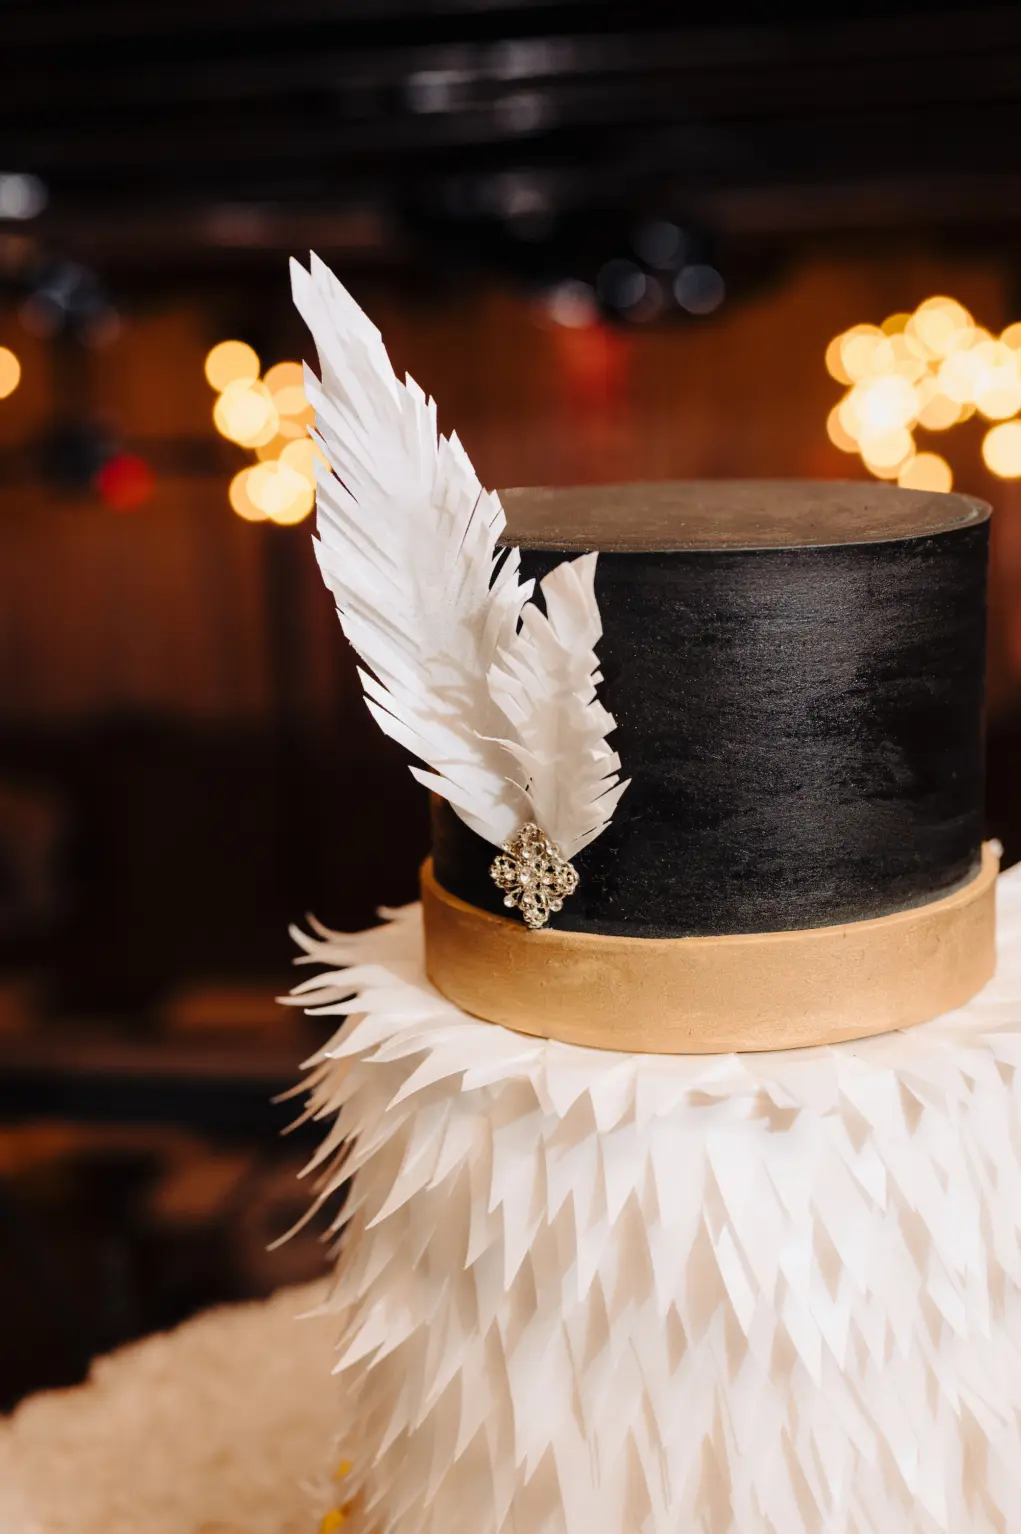 Black, White, and Gold Two-Tiered Feathered Cake Inspiration for Modern Great Gatsby Themed Wedding | Tampa Bay Bakery The Artistic Whisk